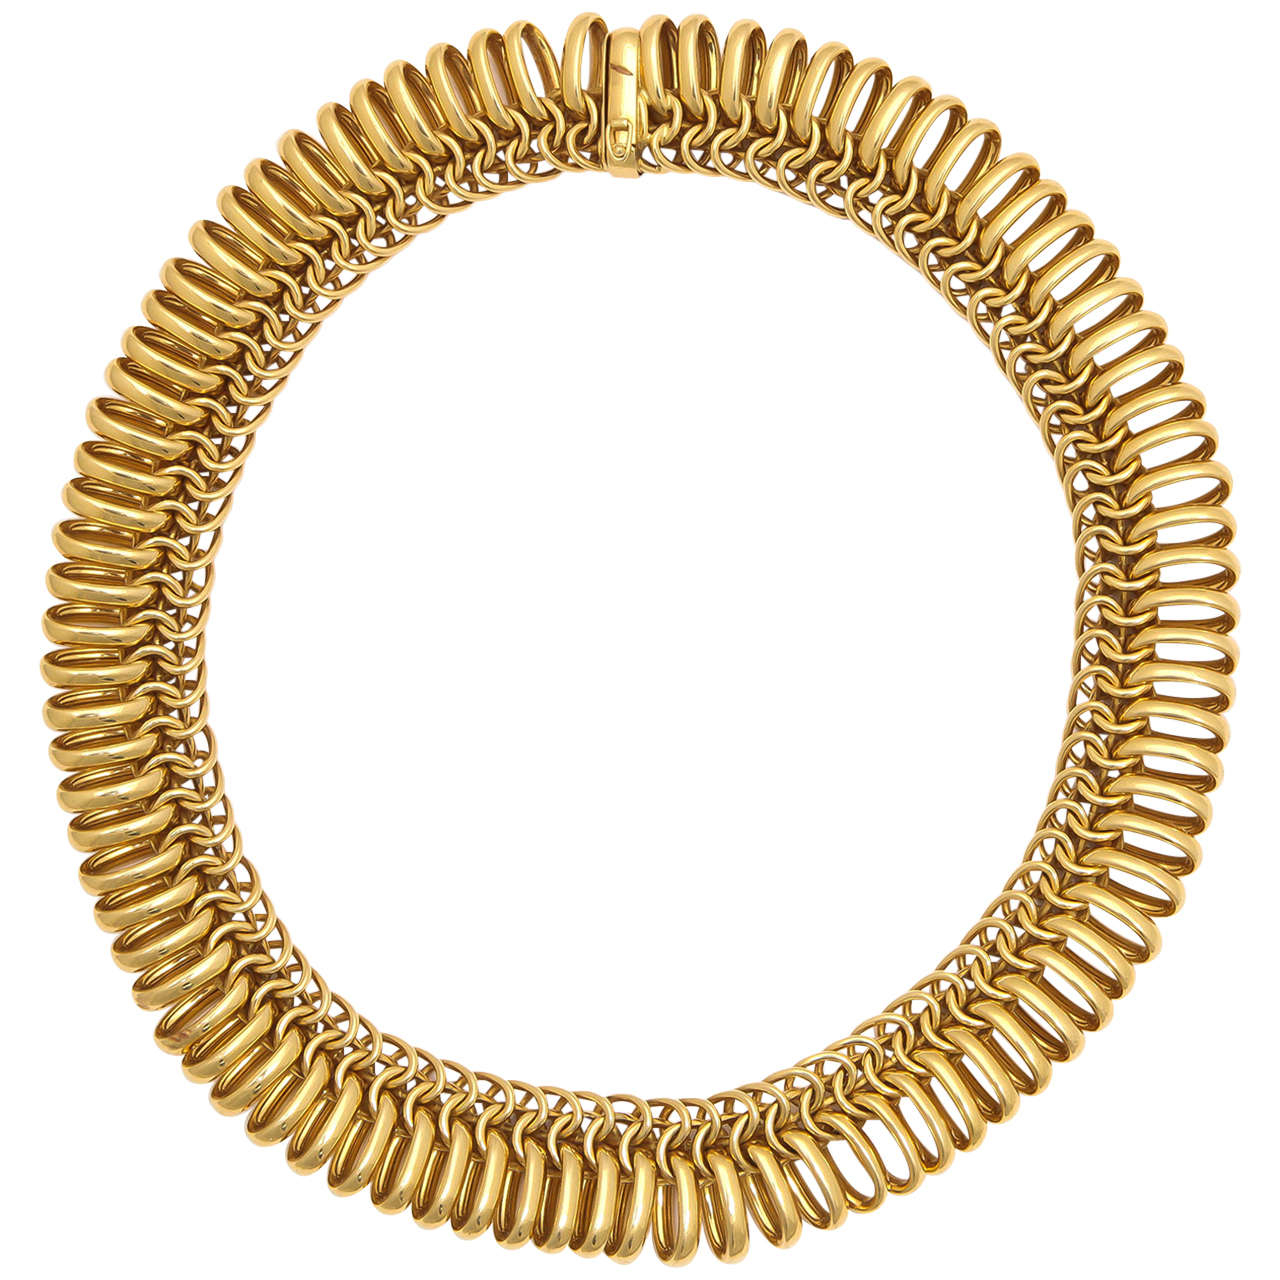 1980s  Abel & Zimmerman Gold Two Textured Open Spiral Slinky  Necklace